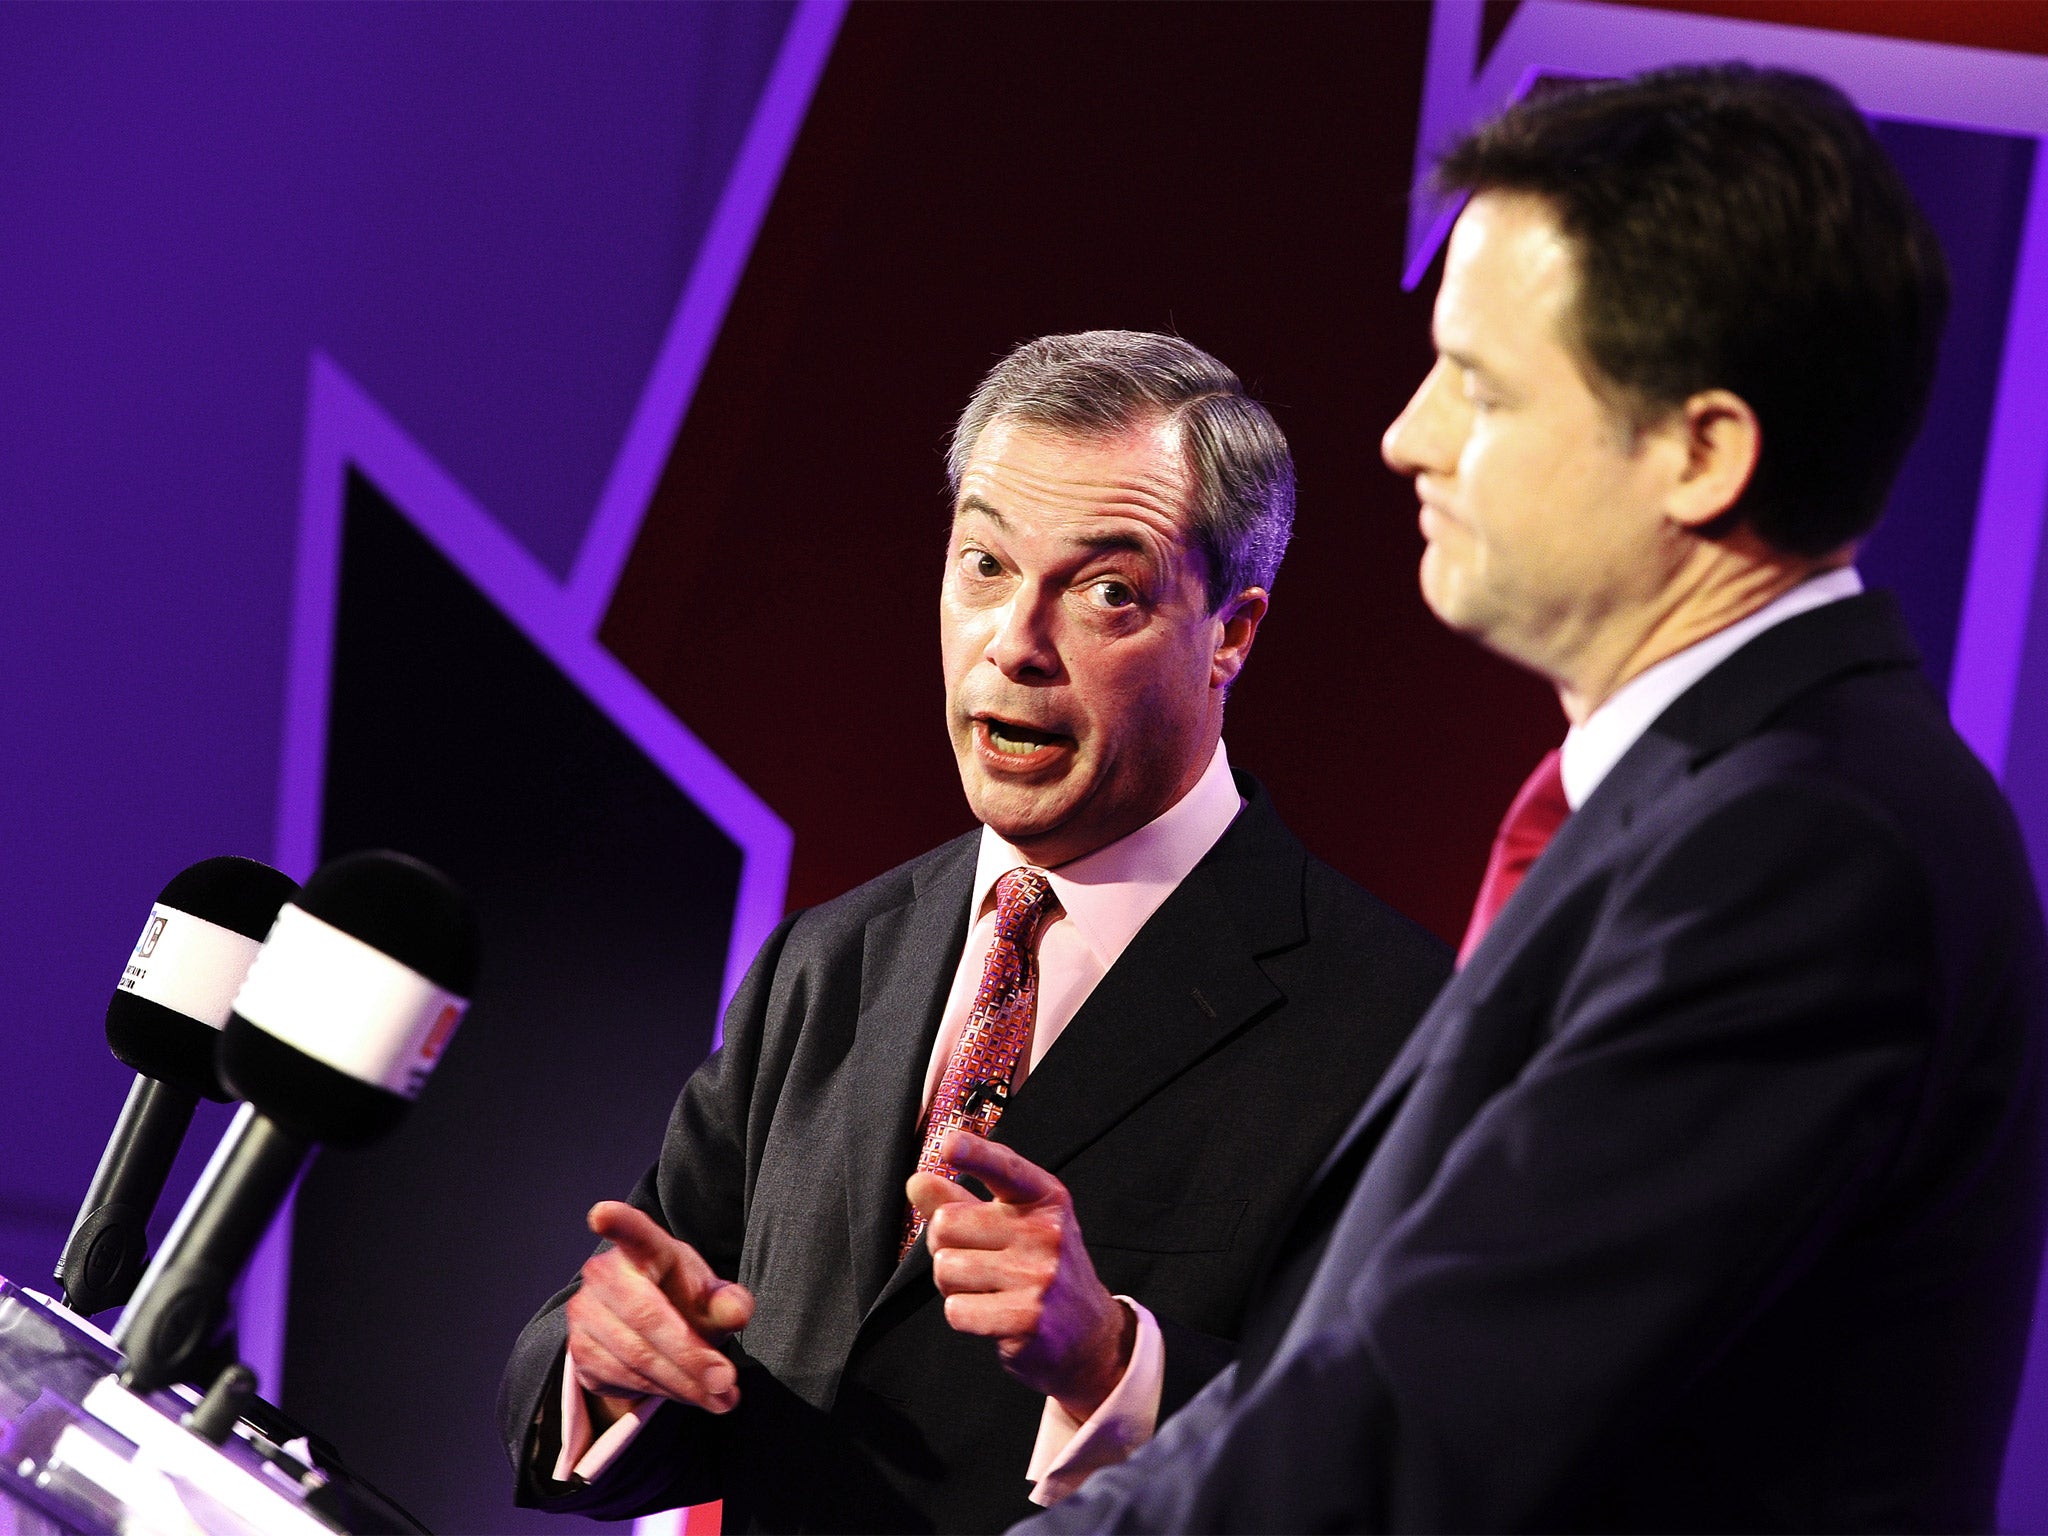 Nigel Farage and Nick Clegg take part in a debate over Britain's future in the European Union